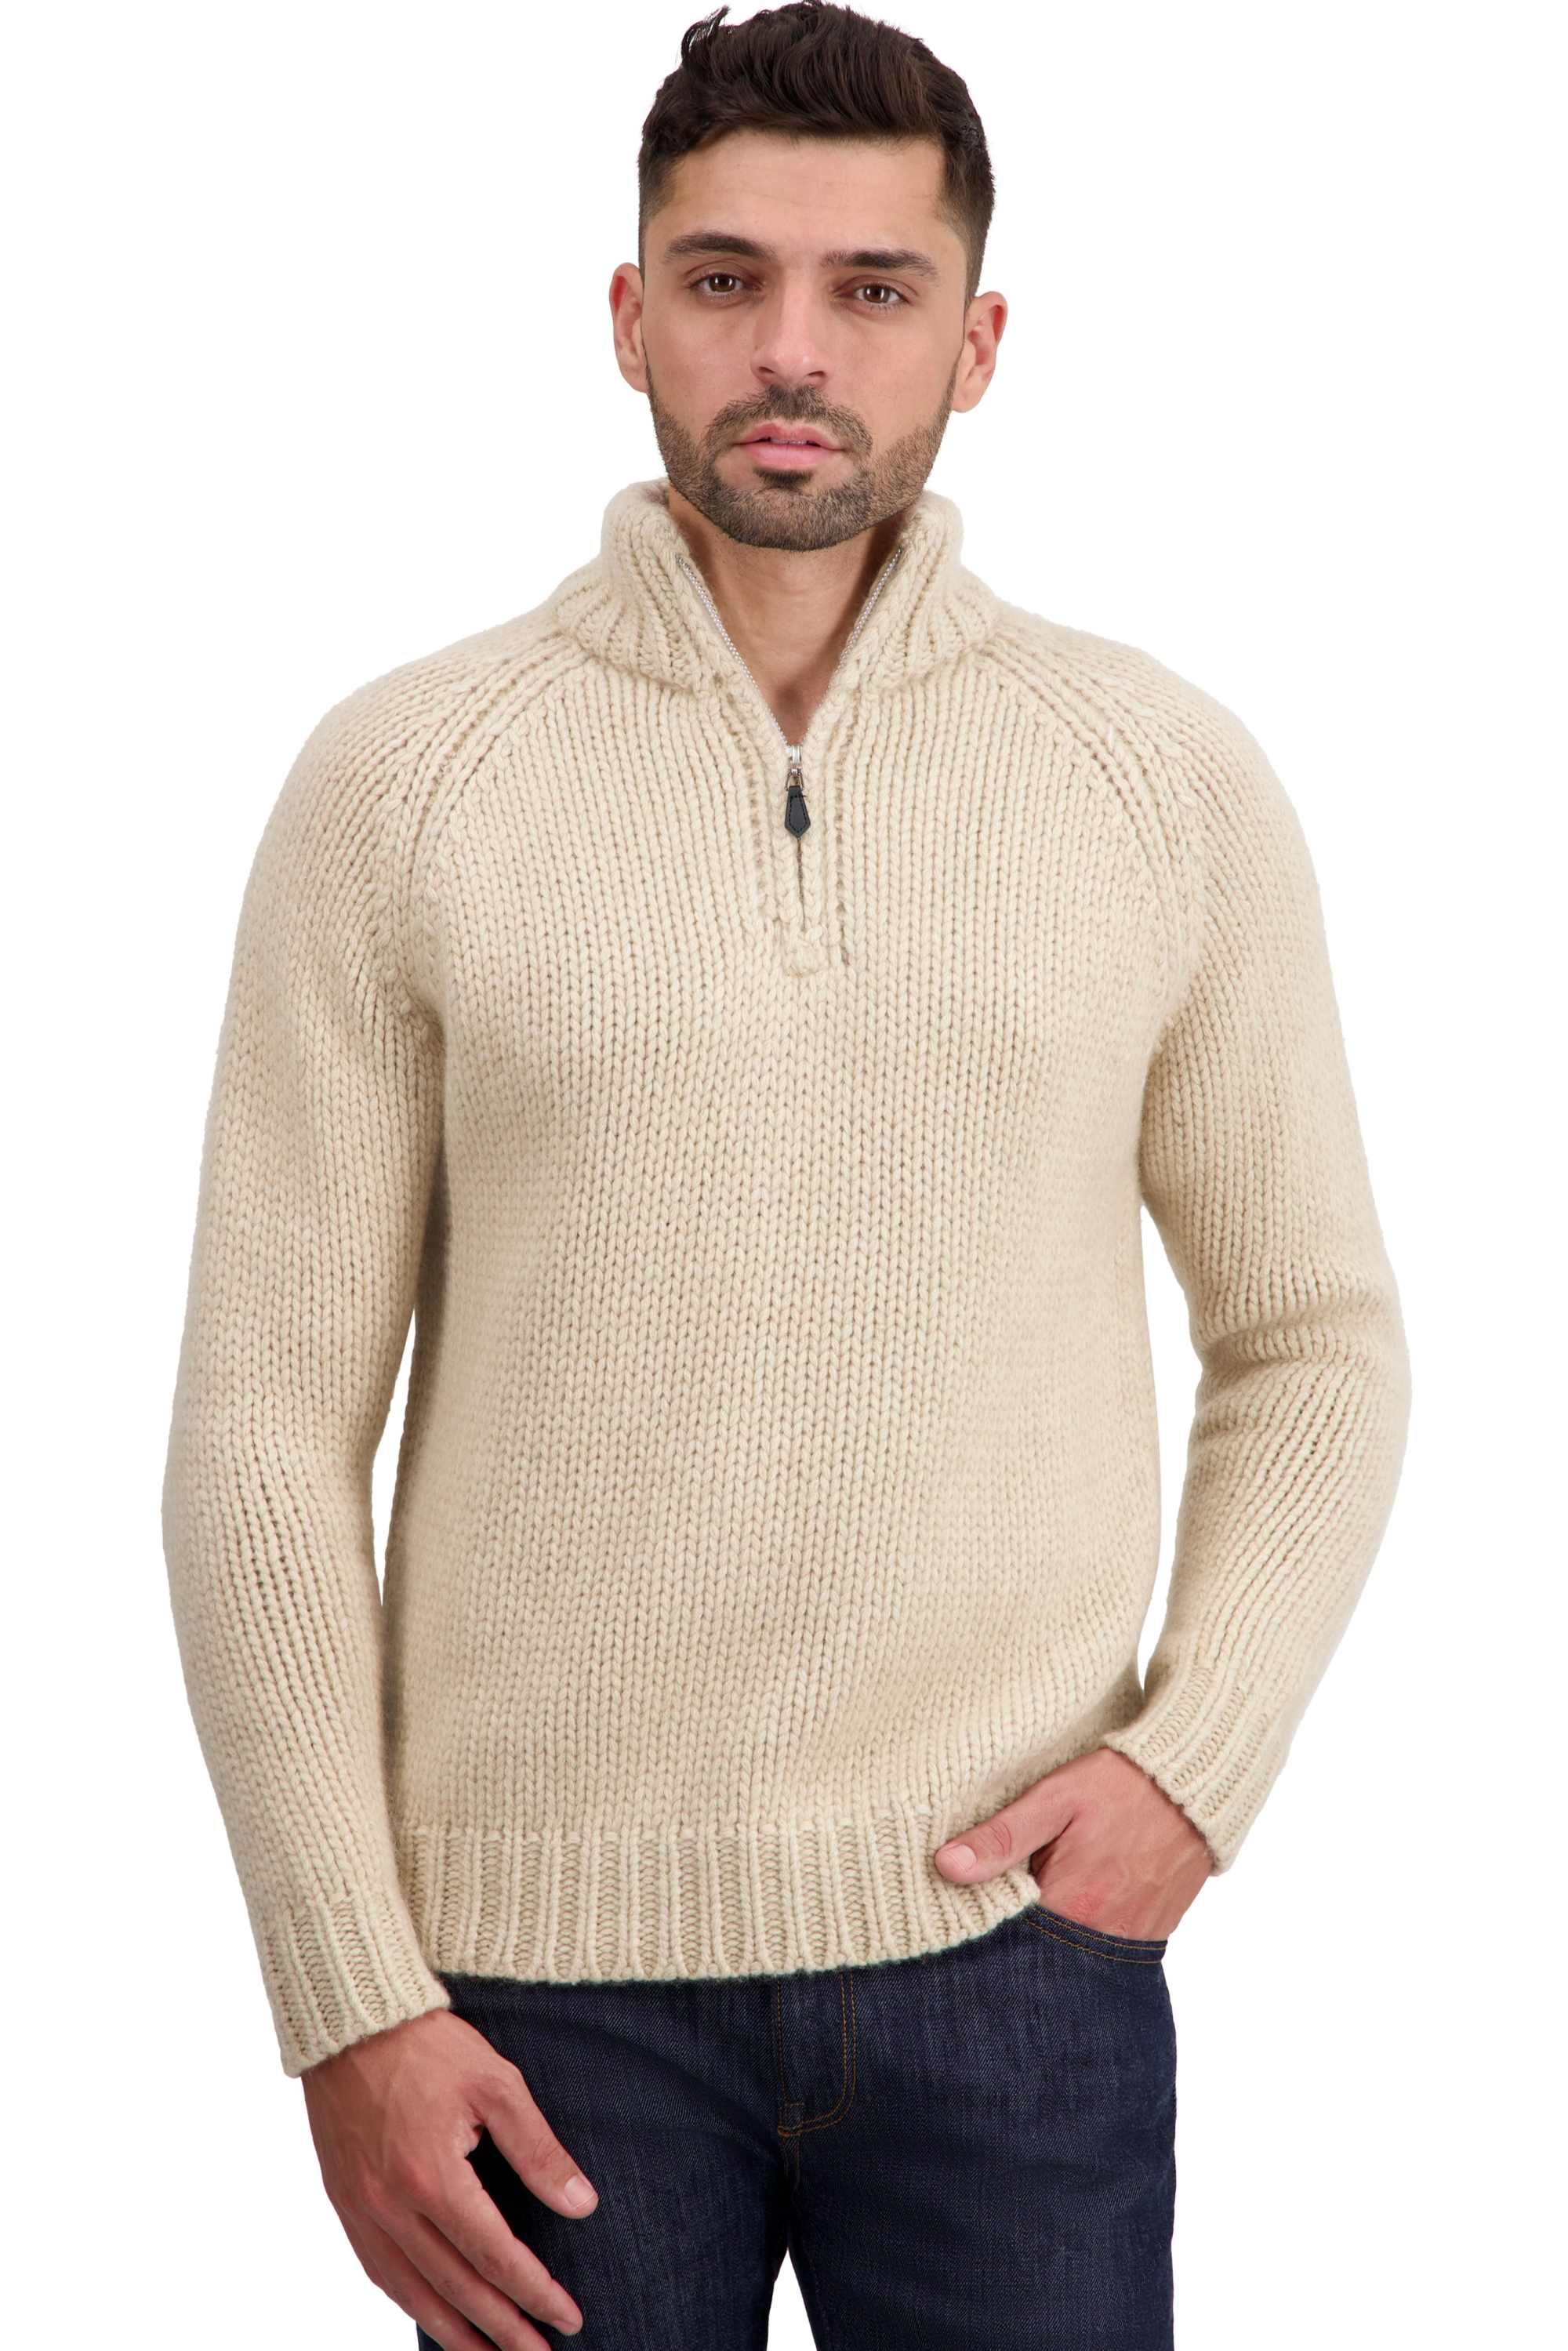 Cashmere men polo style sweaters tripoli natural winter dawn natural beige m